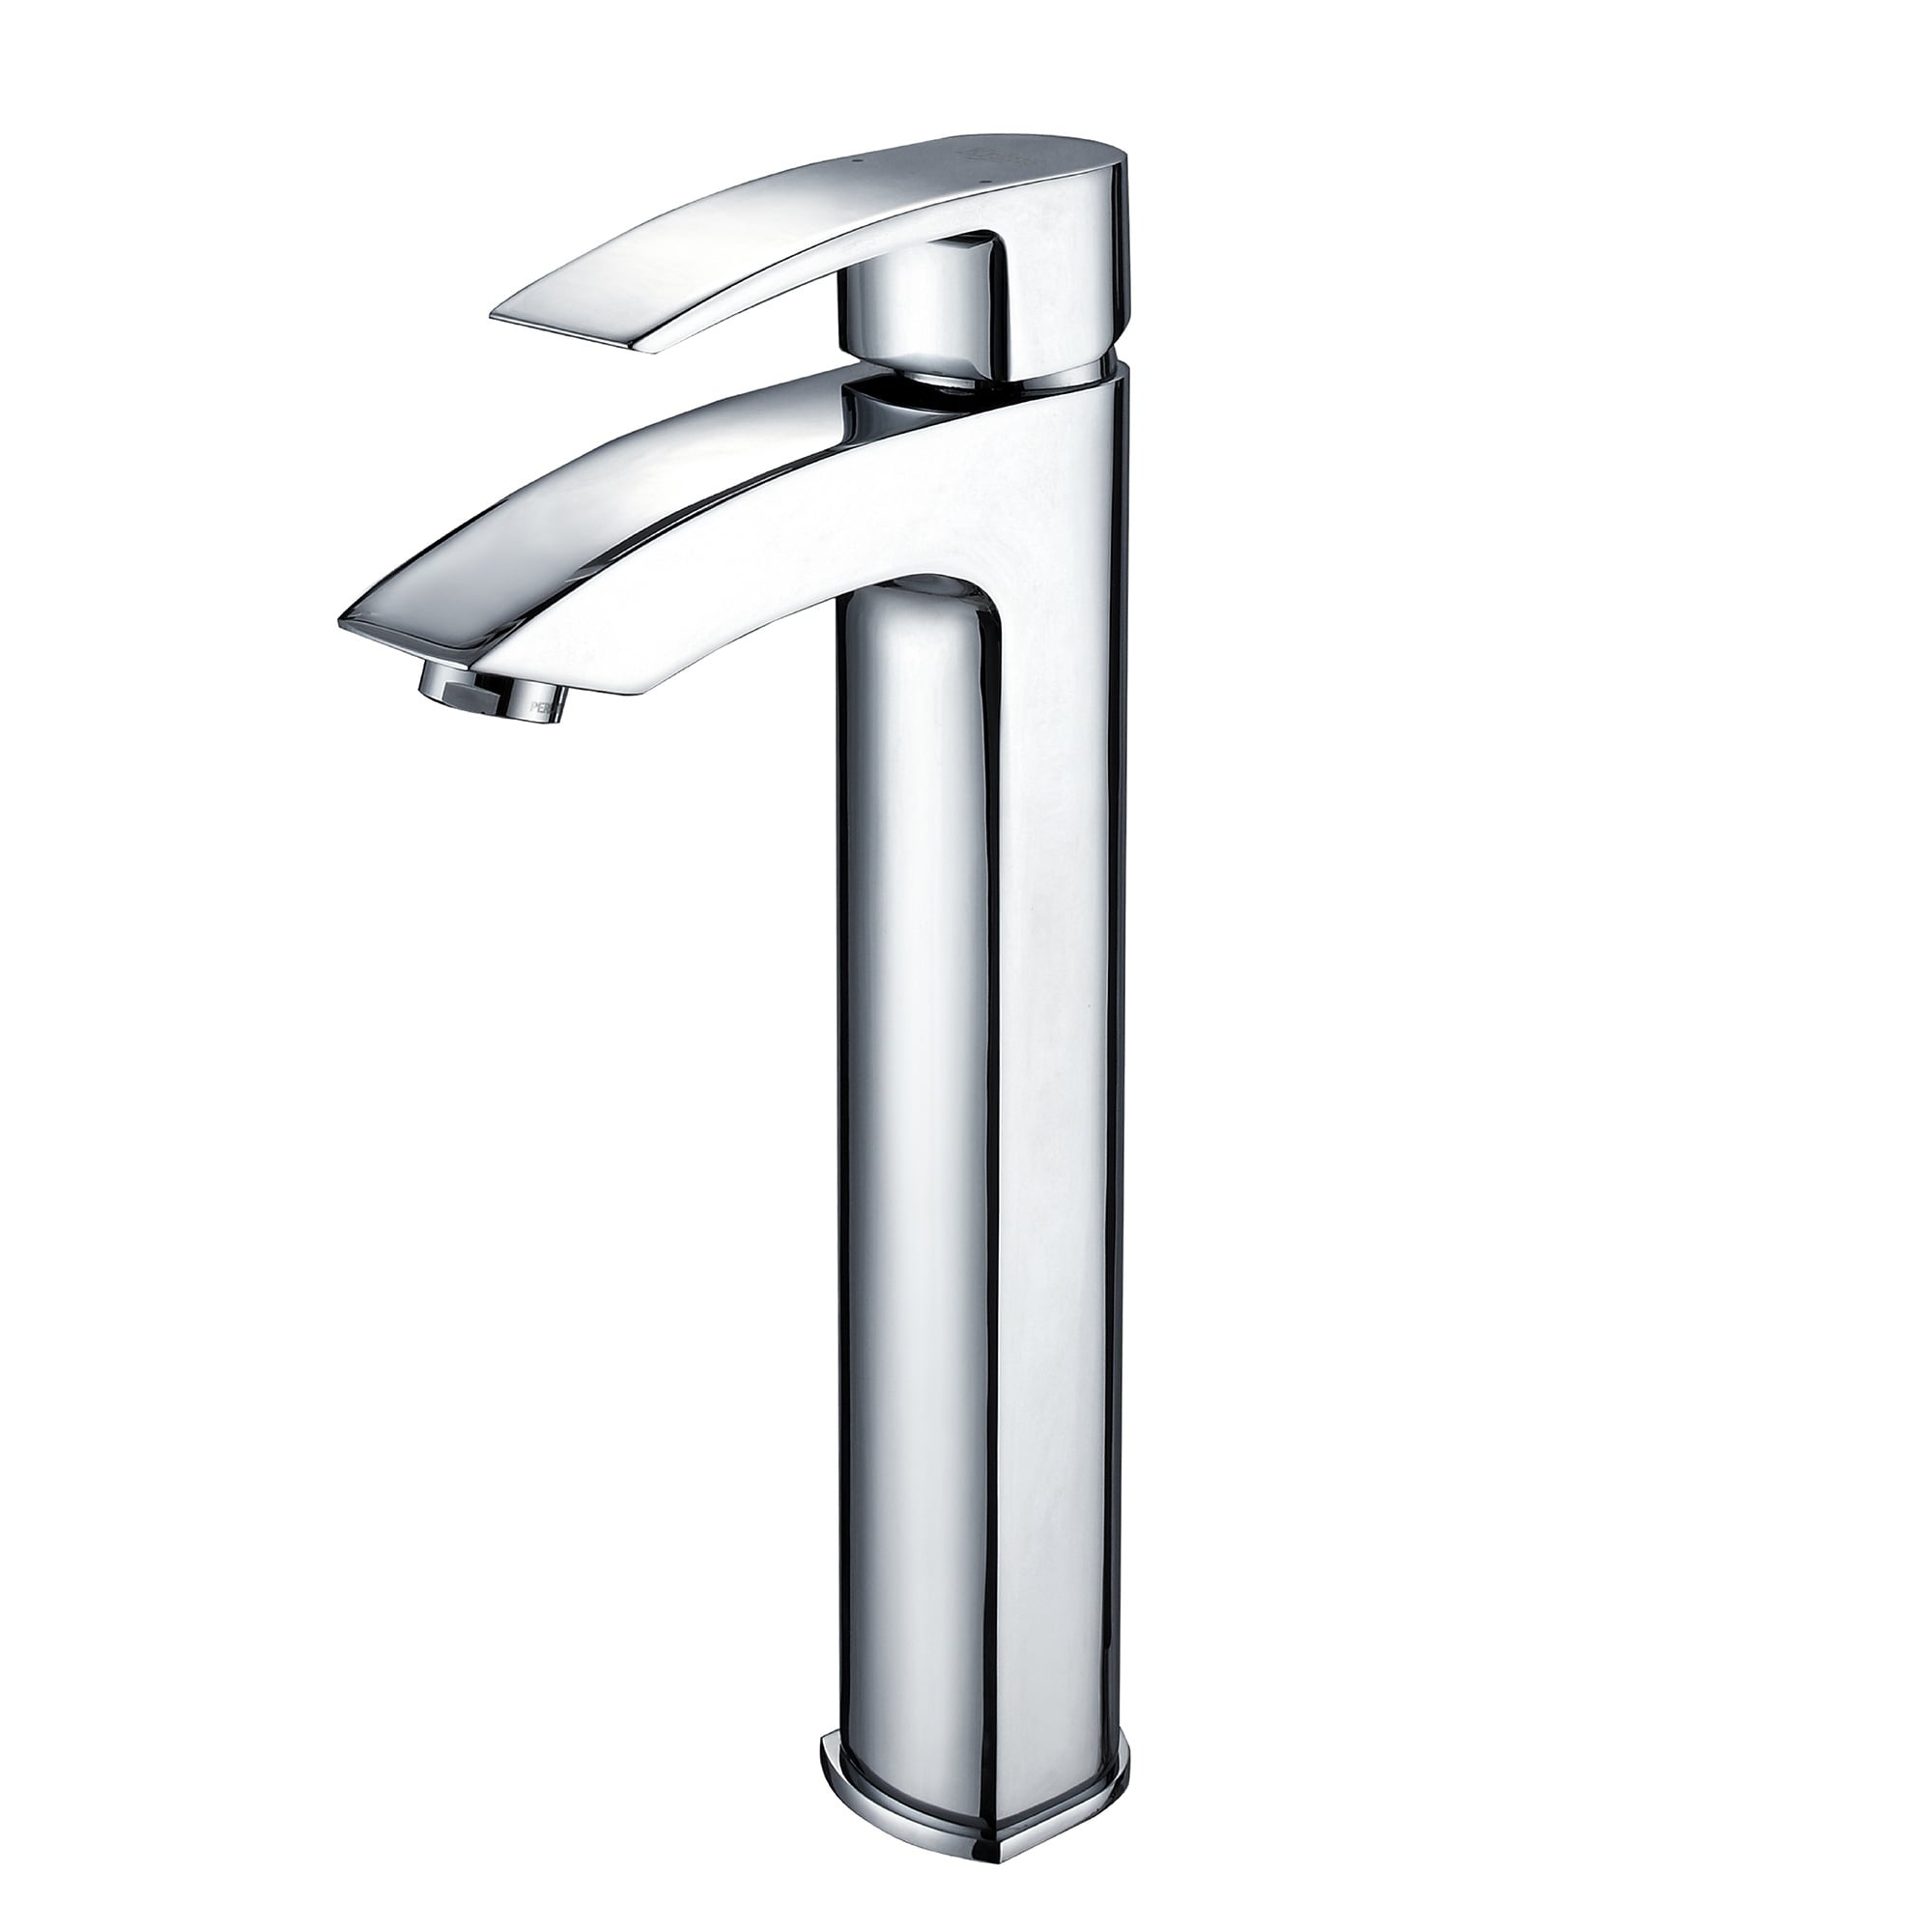 Kraus FVS-1810 Visio Single Hole Single-Handle Vessel Bathroom Faucet with Pop-Up Drain in Chrome finish